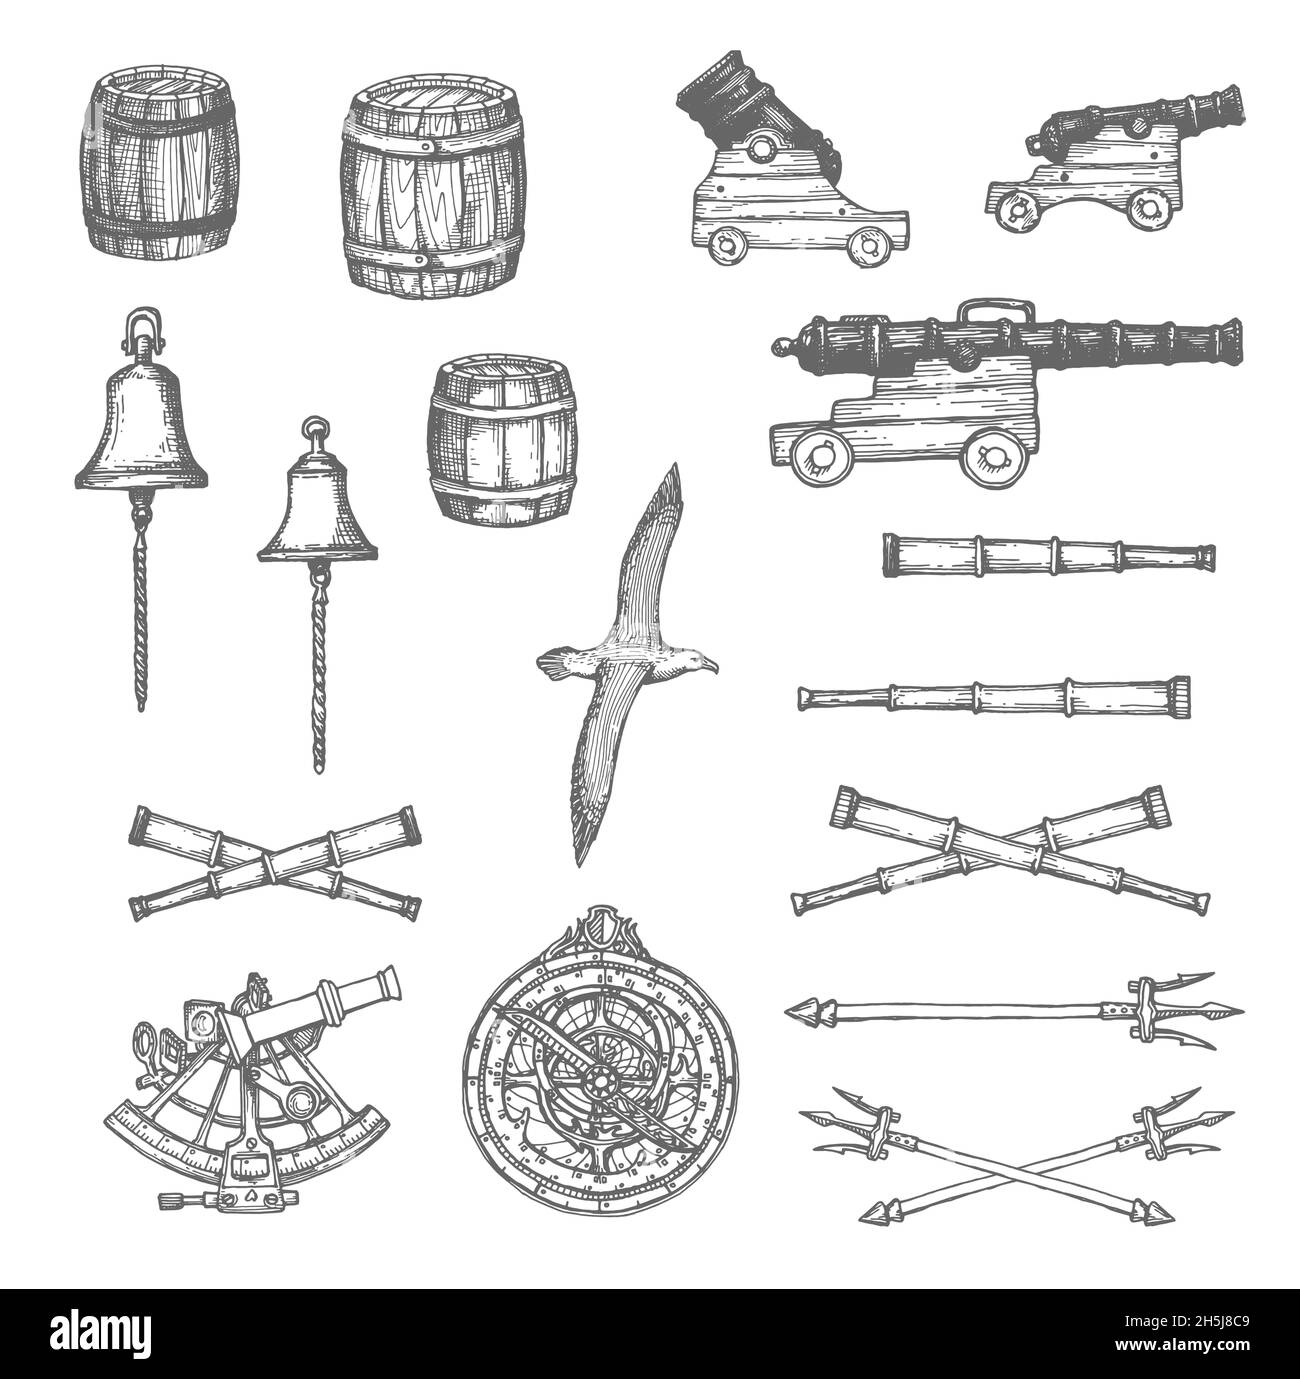 Cannon, barrel and spyglass, bell, trident and astrolabe, sextant sketch. Medieval sailing equipment, fleet navigation instruments and weapons, mortar Stock Vector